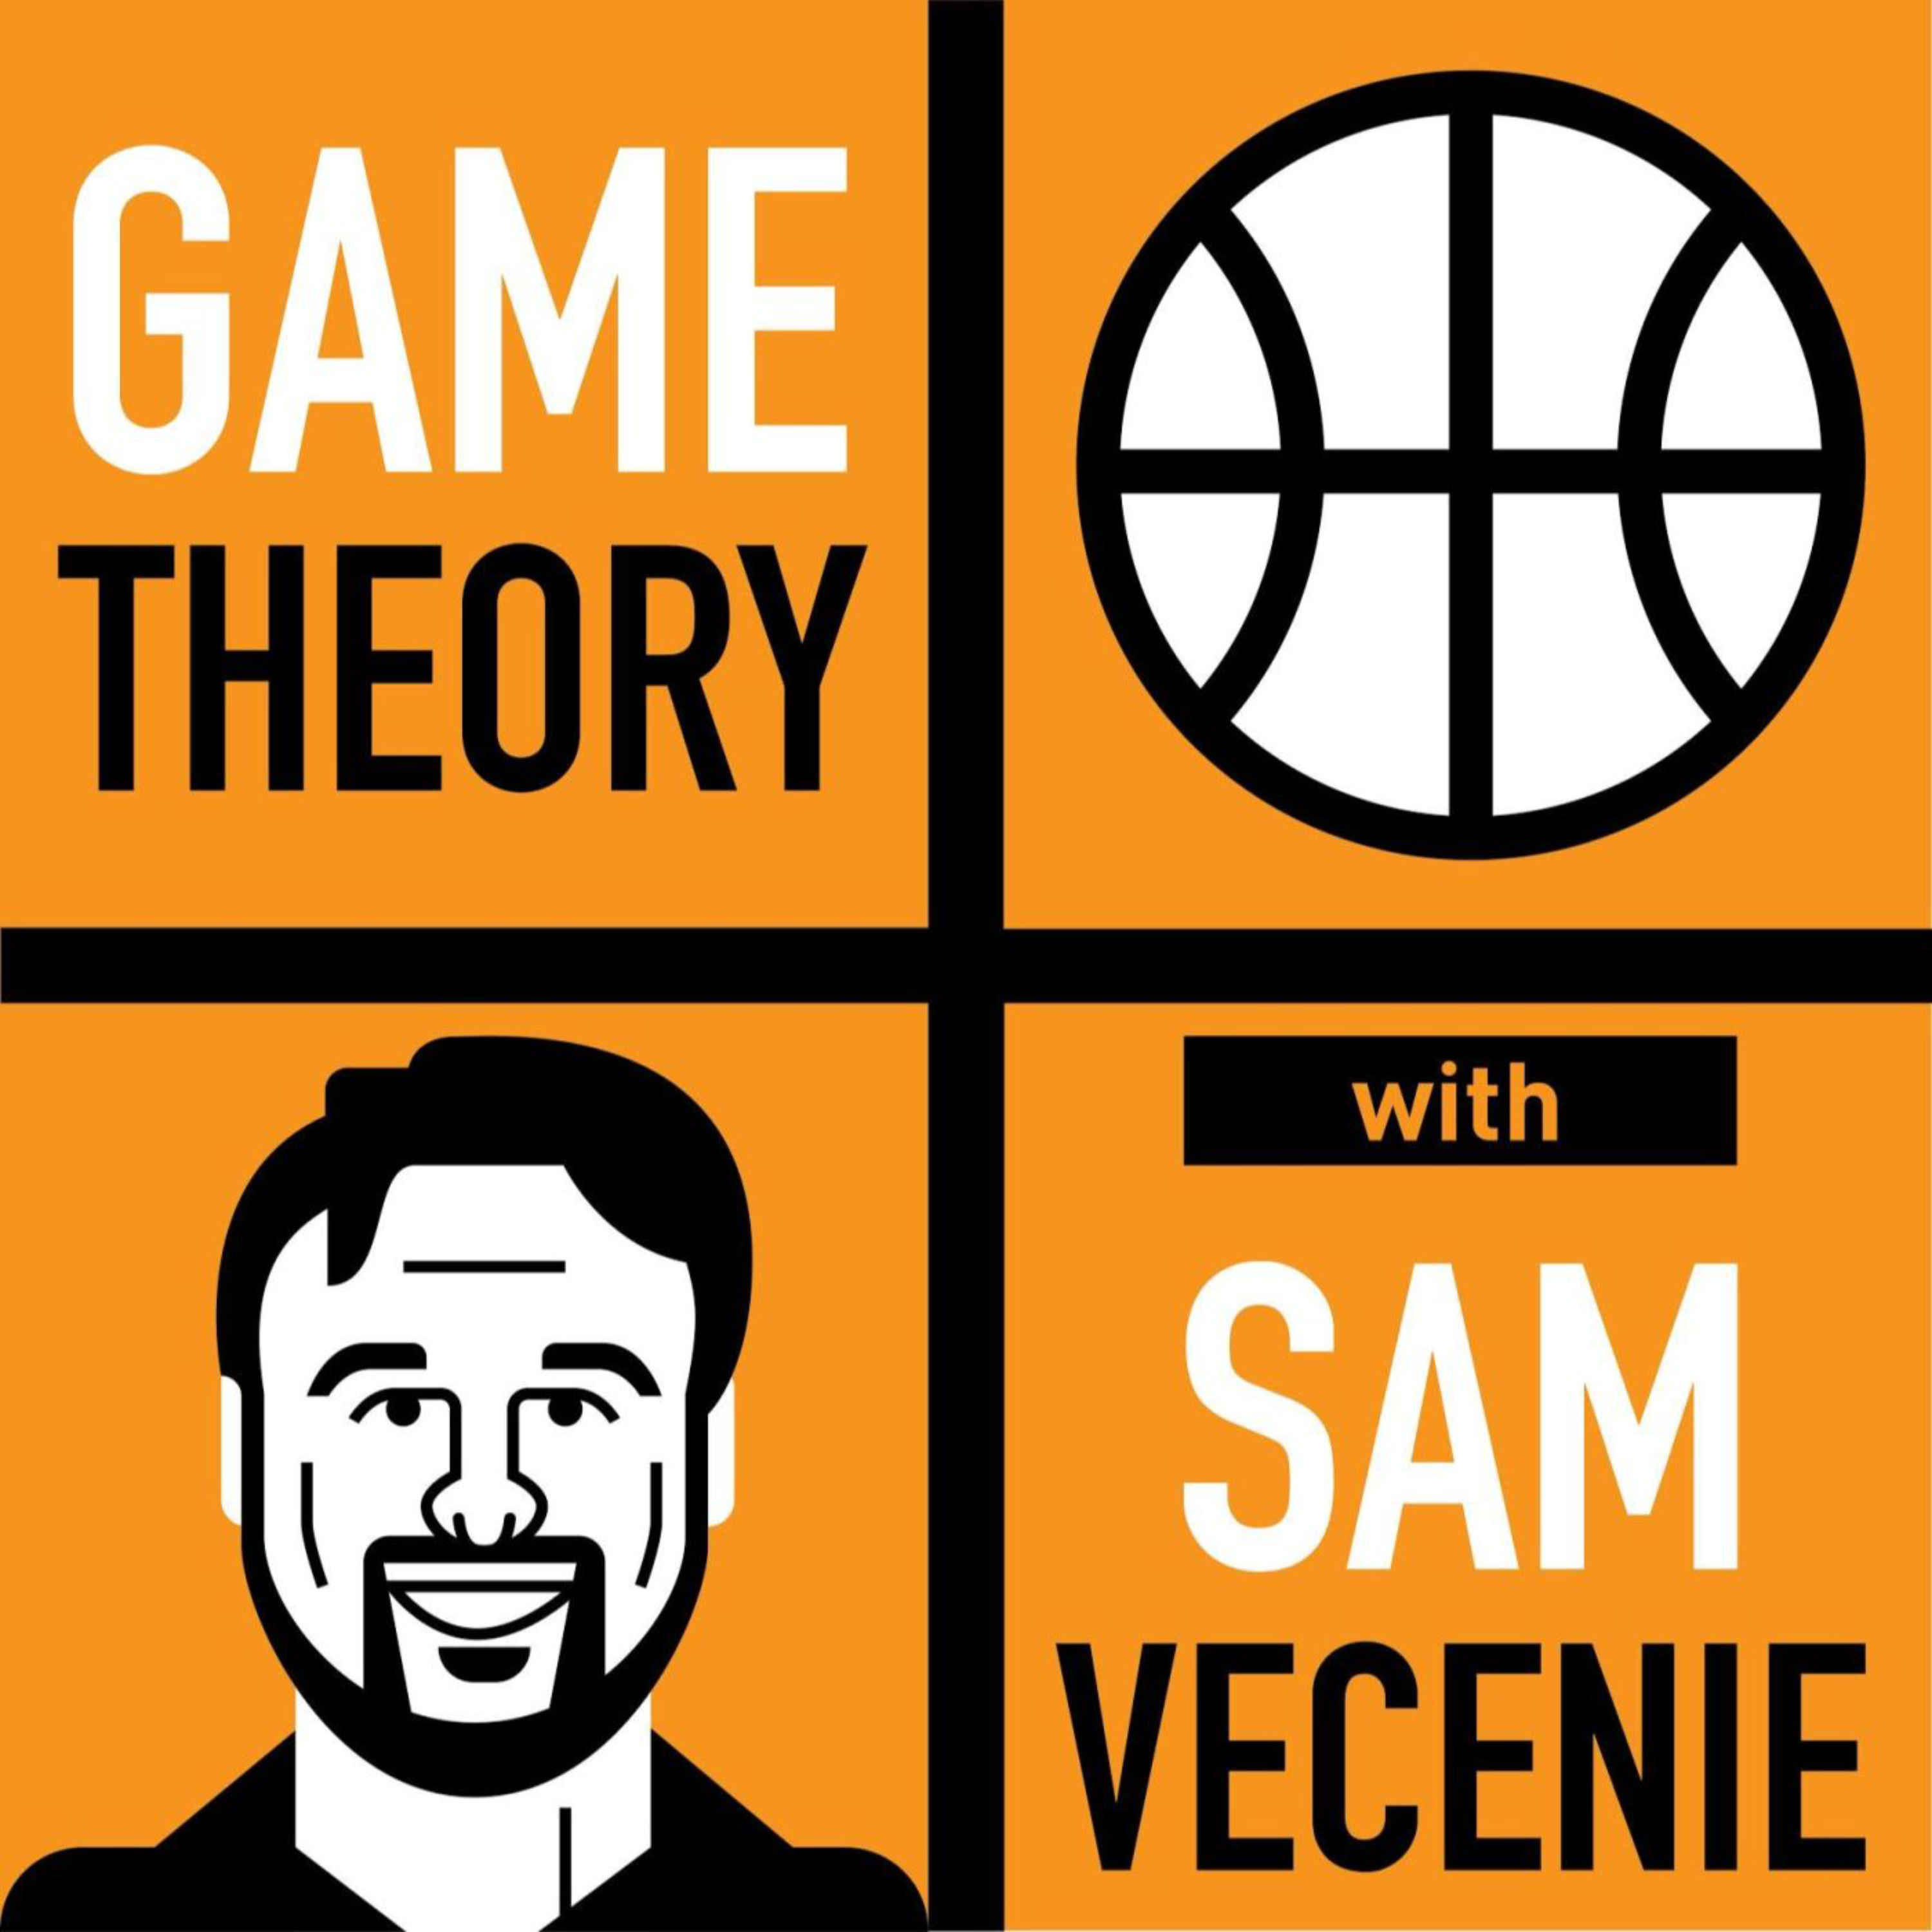 Fresh update on "cam johnson" discussed on Game Theory Podcast